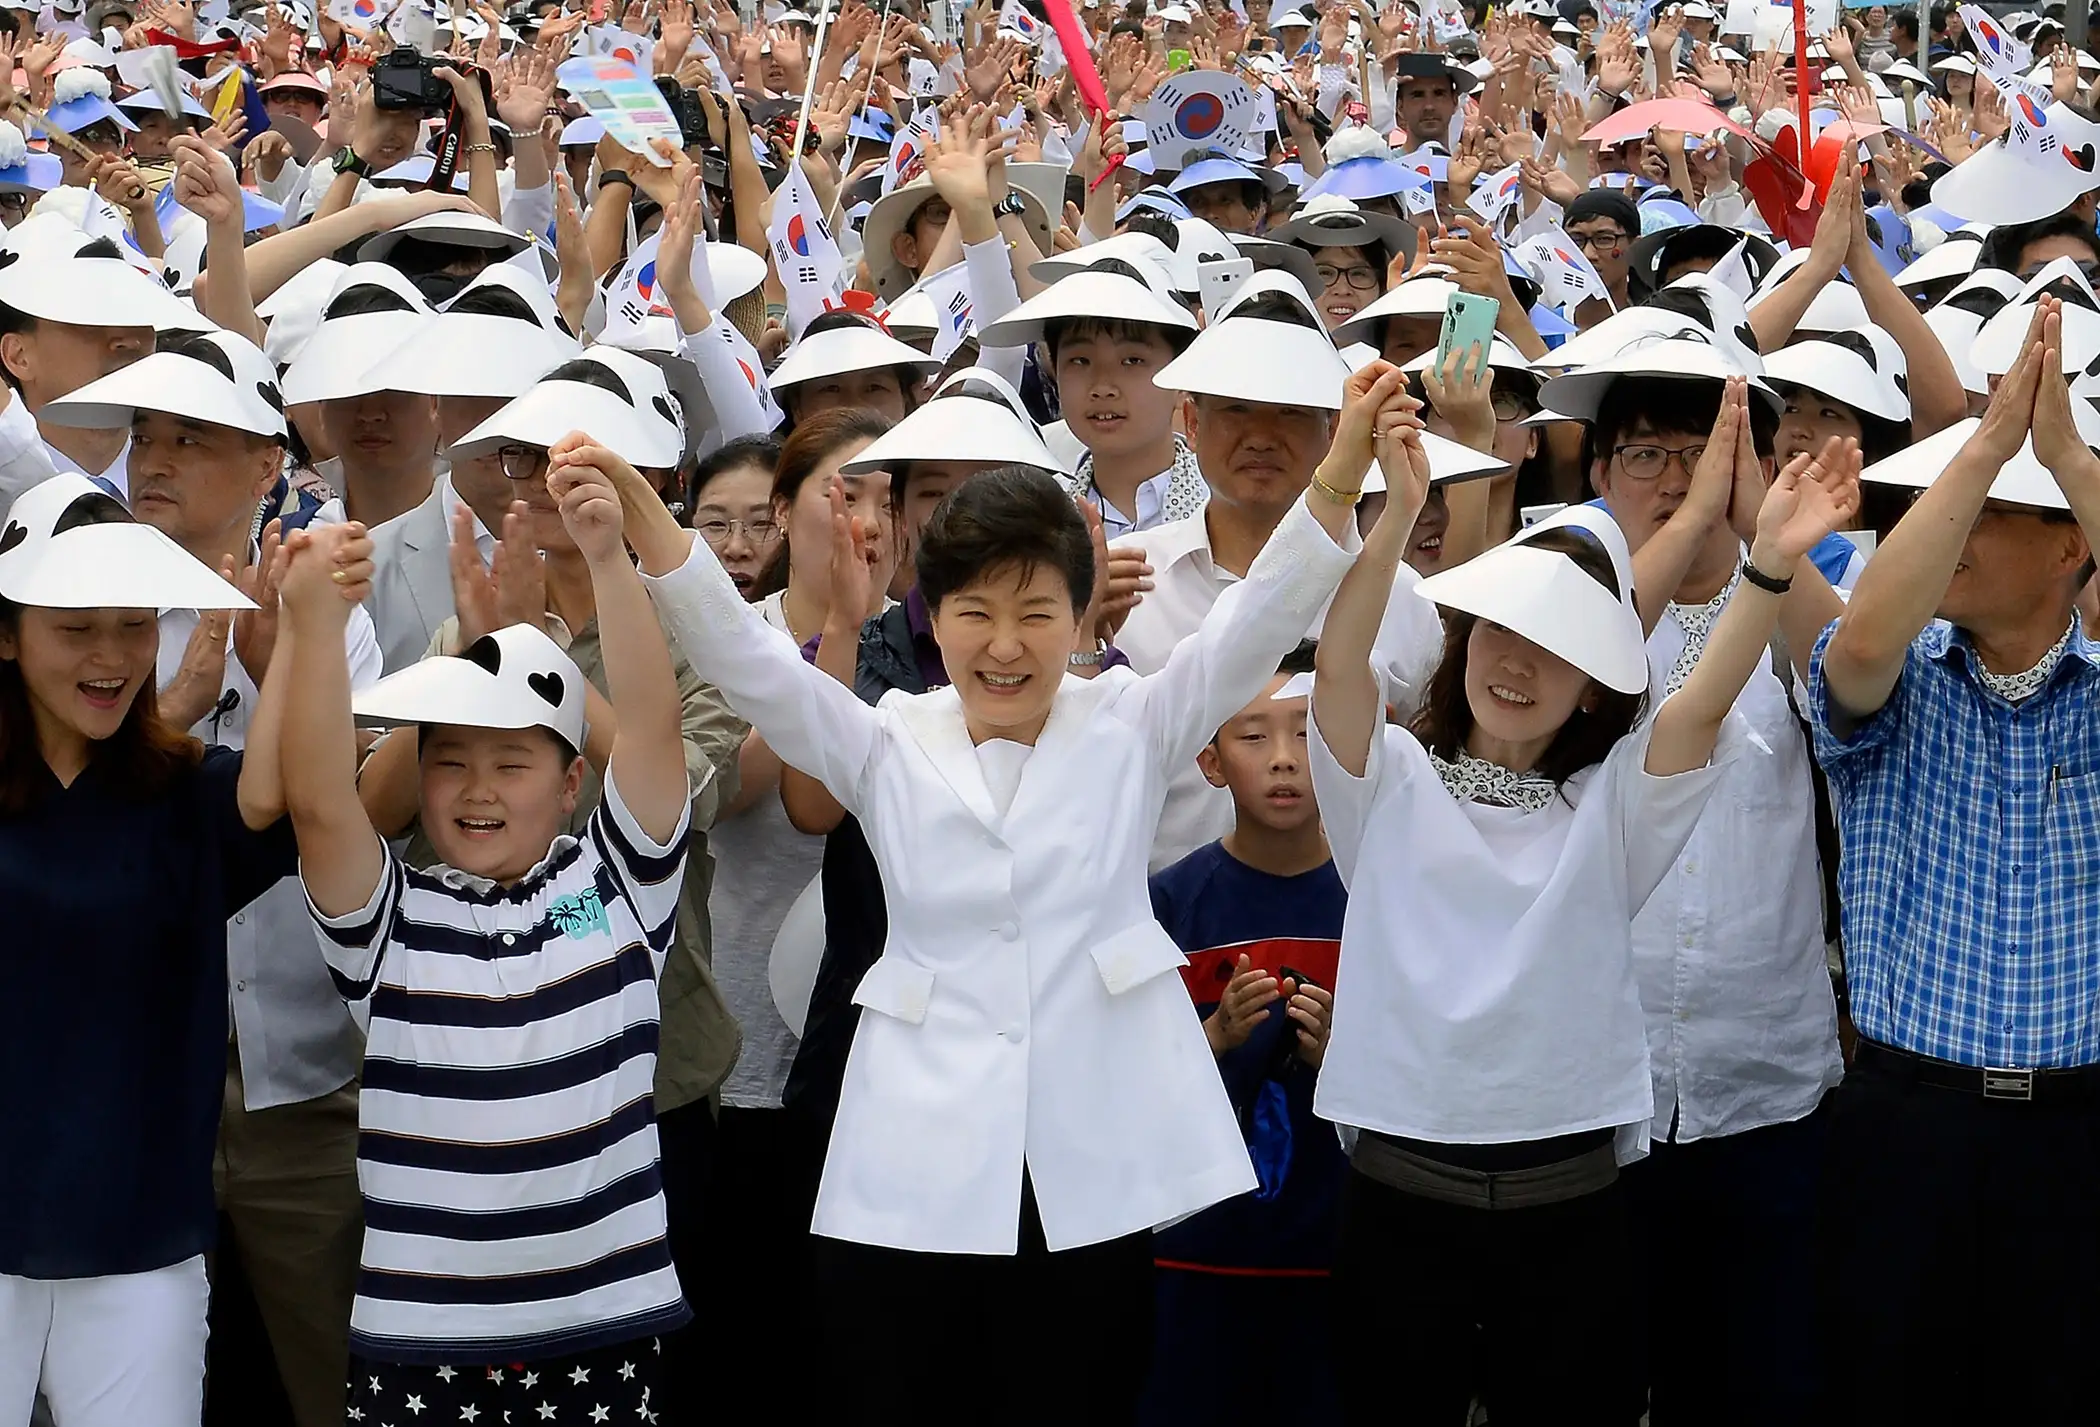 South Korean President Park Geun-Hye gives three cheers during a ceremony to celebrate the 70th Independence Day on August 15, 2015 in Seoul, South Korea. Korea was liberated from Japan's 35-year colonial rule on August 15, 1945 at the end of World War II.